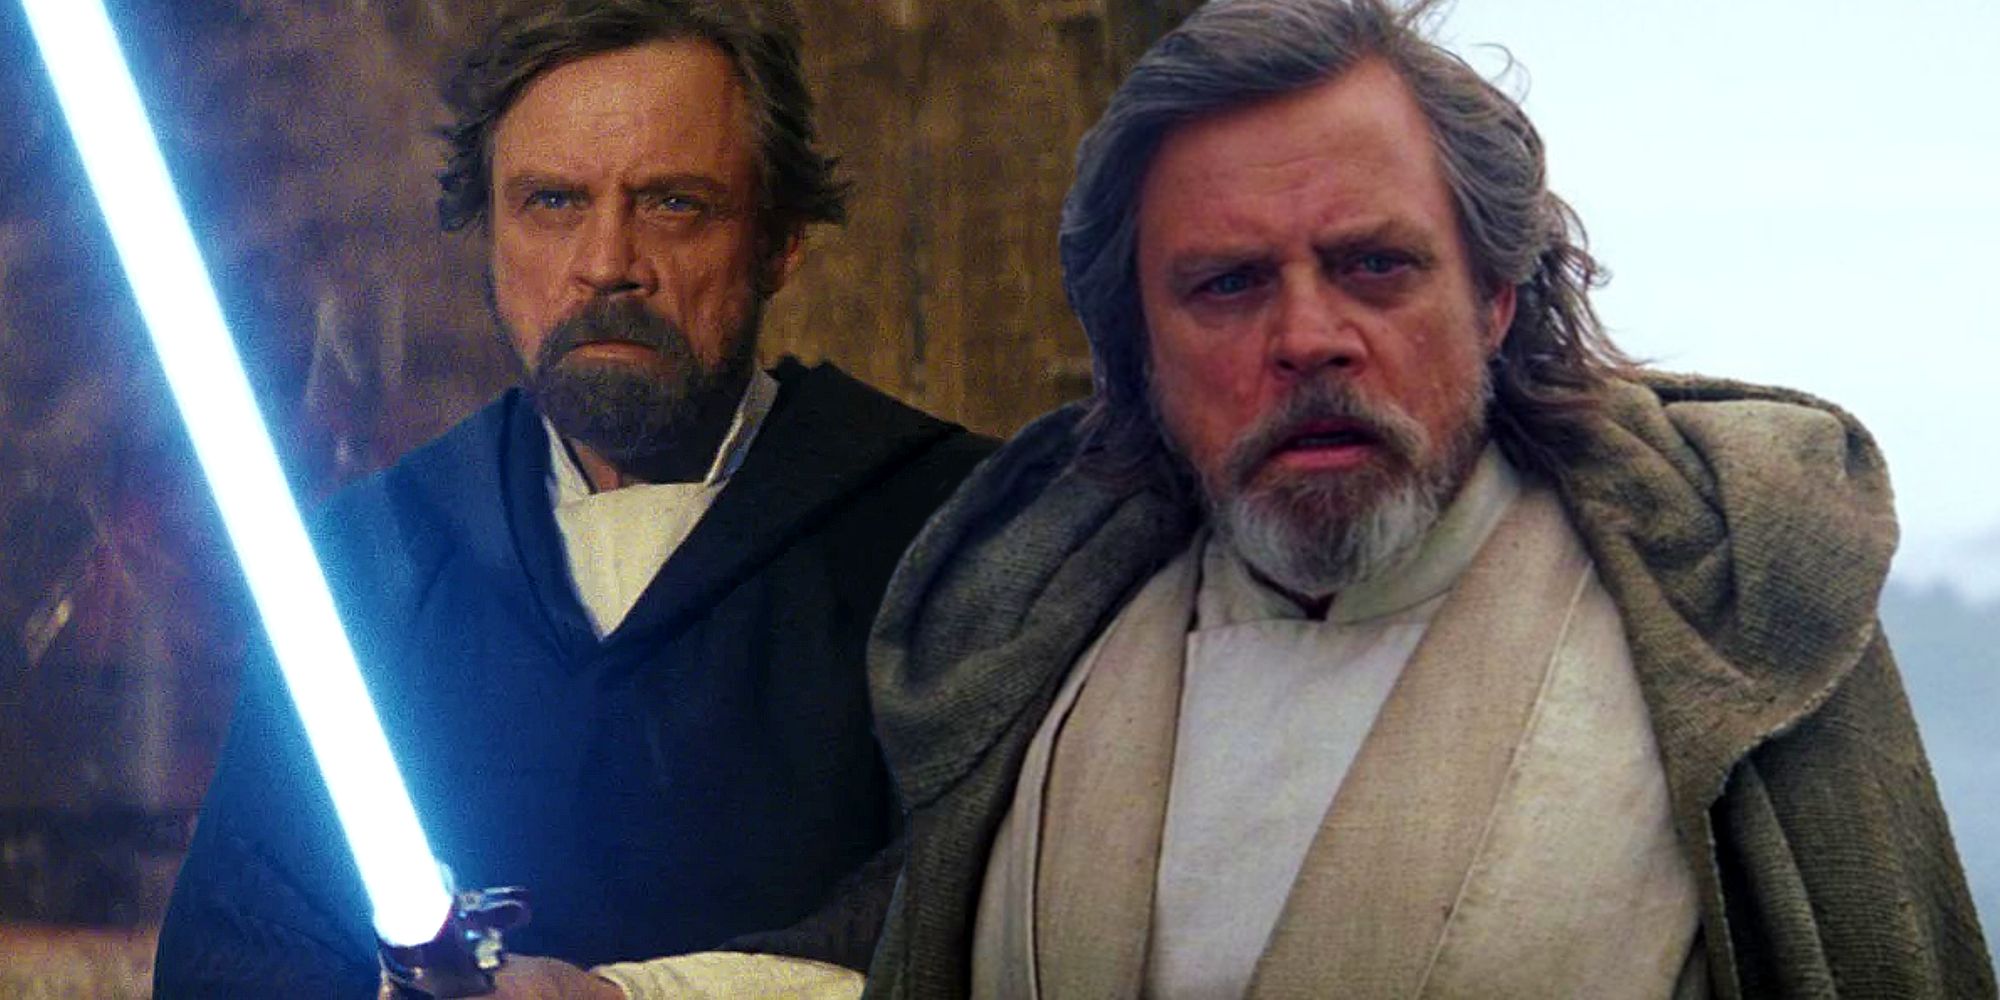 Mark Hamill Luke Skywalker as seen in the Star Wars sequels: The Force Awakens and The Last Jedi